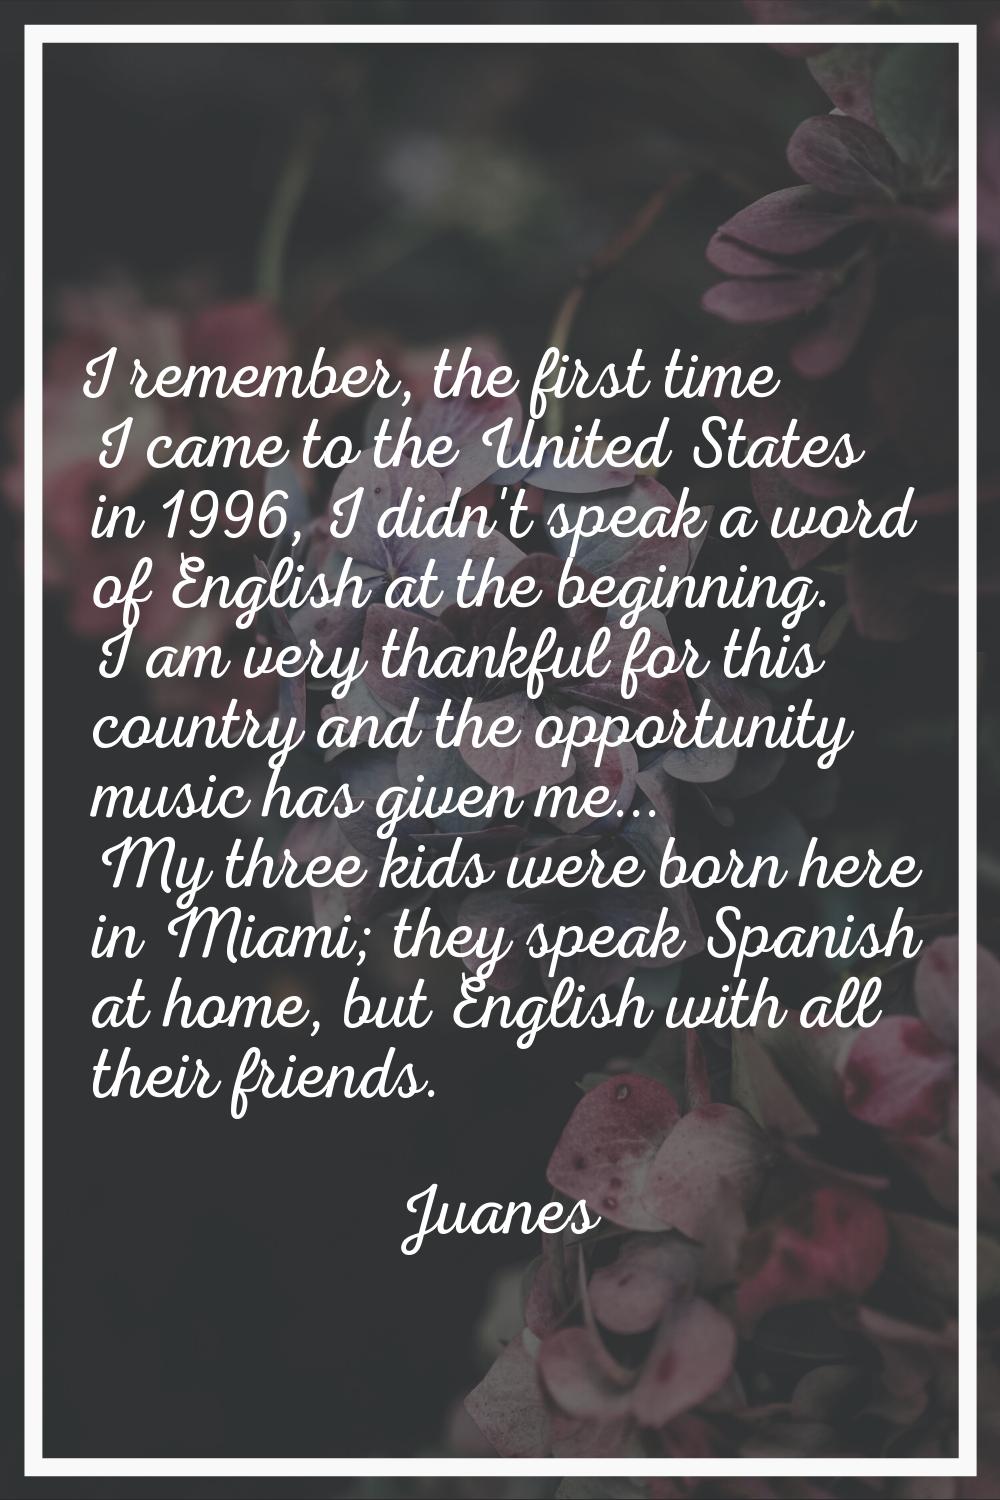 I remember, the first time I came to the United States in 1996, I didn't speak a word of English at